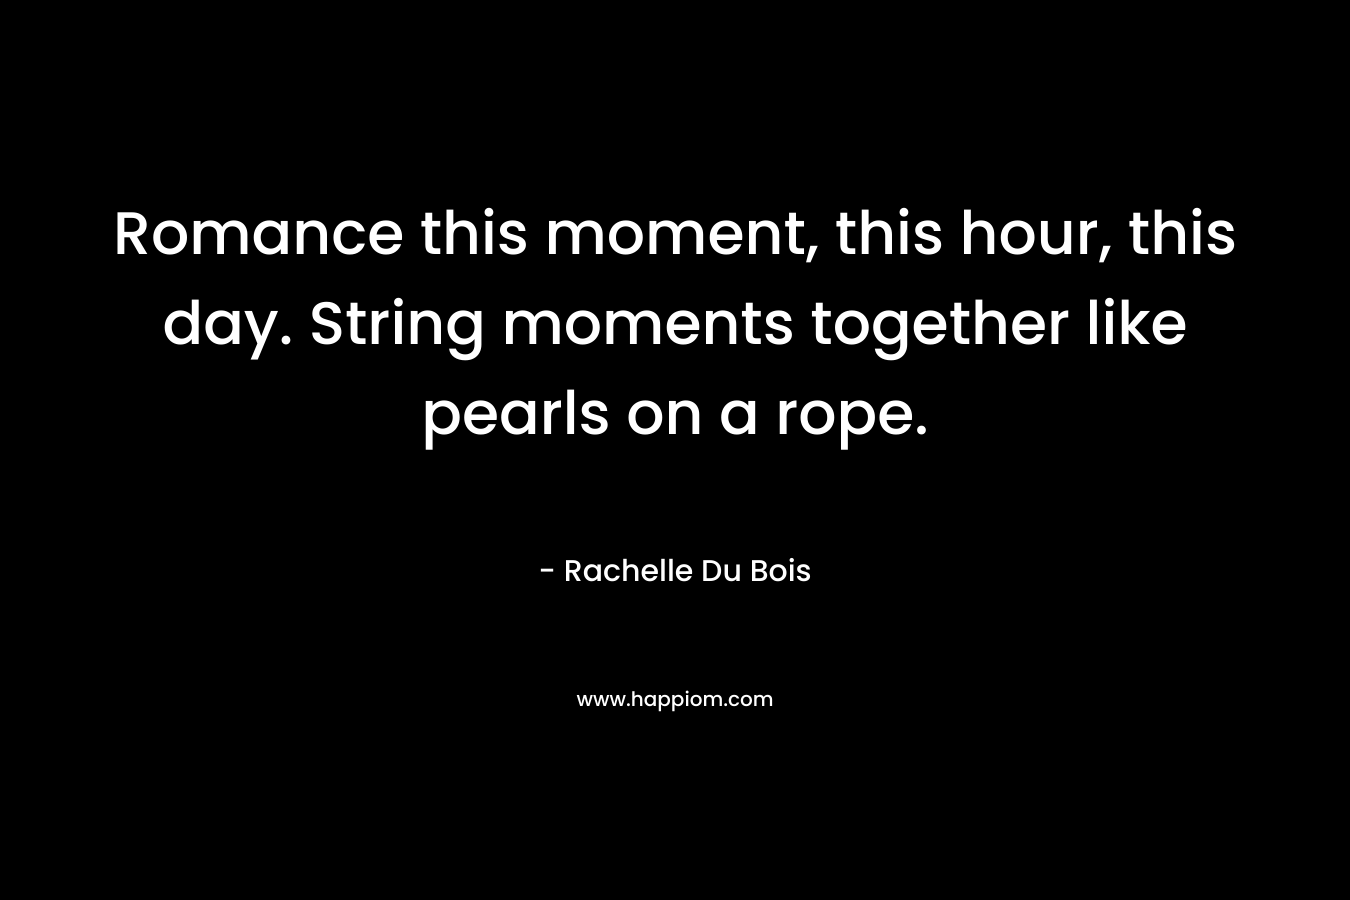 Romance this moment, this hour, this day. String moments together like pearls on a rope.